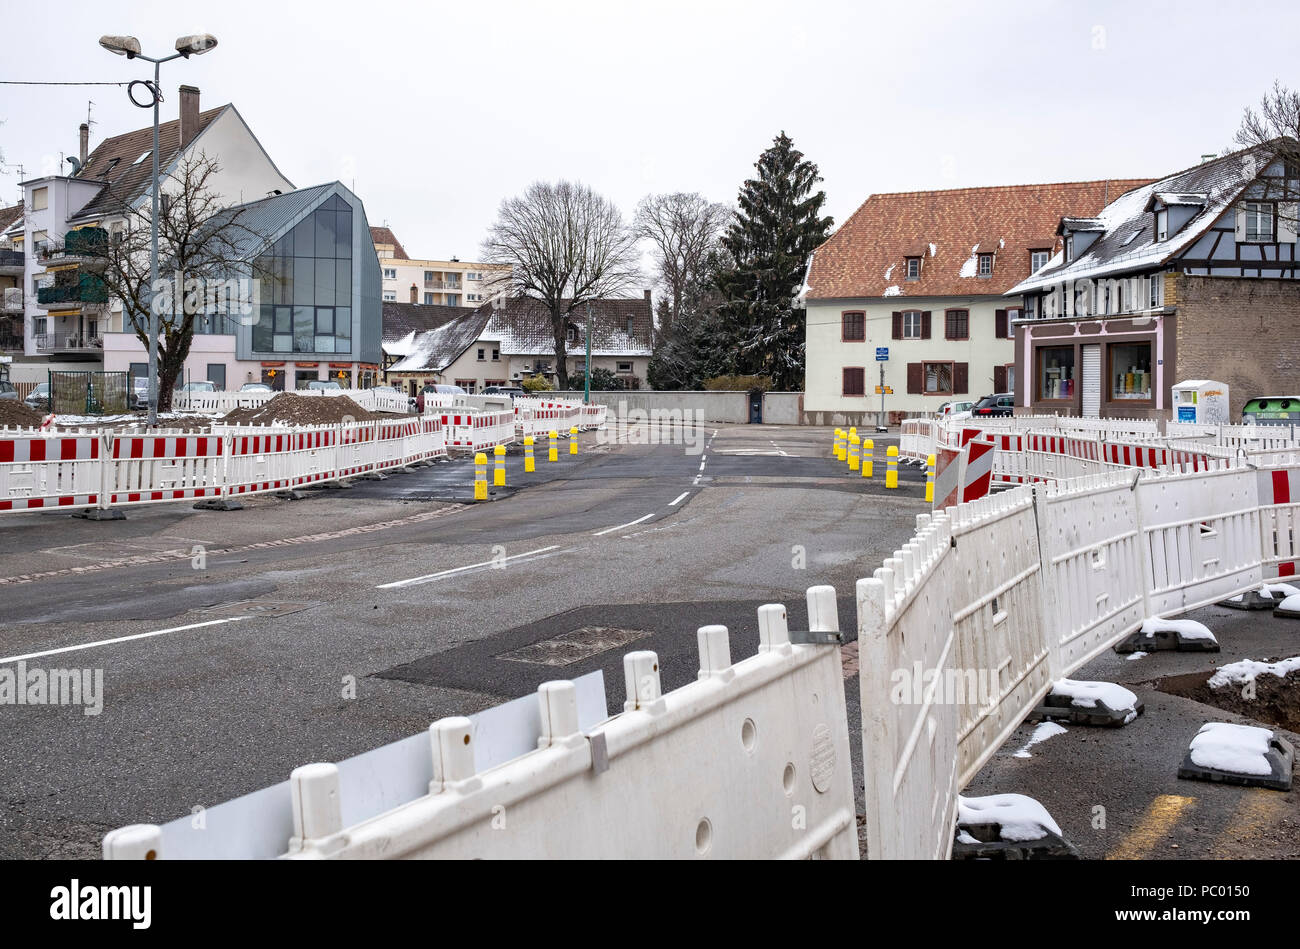 Strasbourg, preliminary tram construction site, line E extension, safety plastic barriers, bollards, street, houses, Alsace, France, Europe, Stock Photo